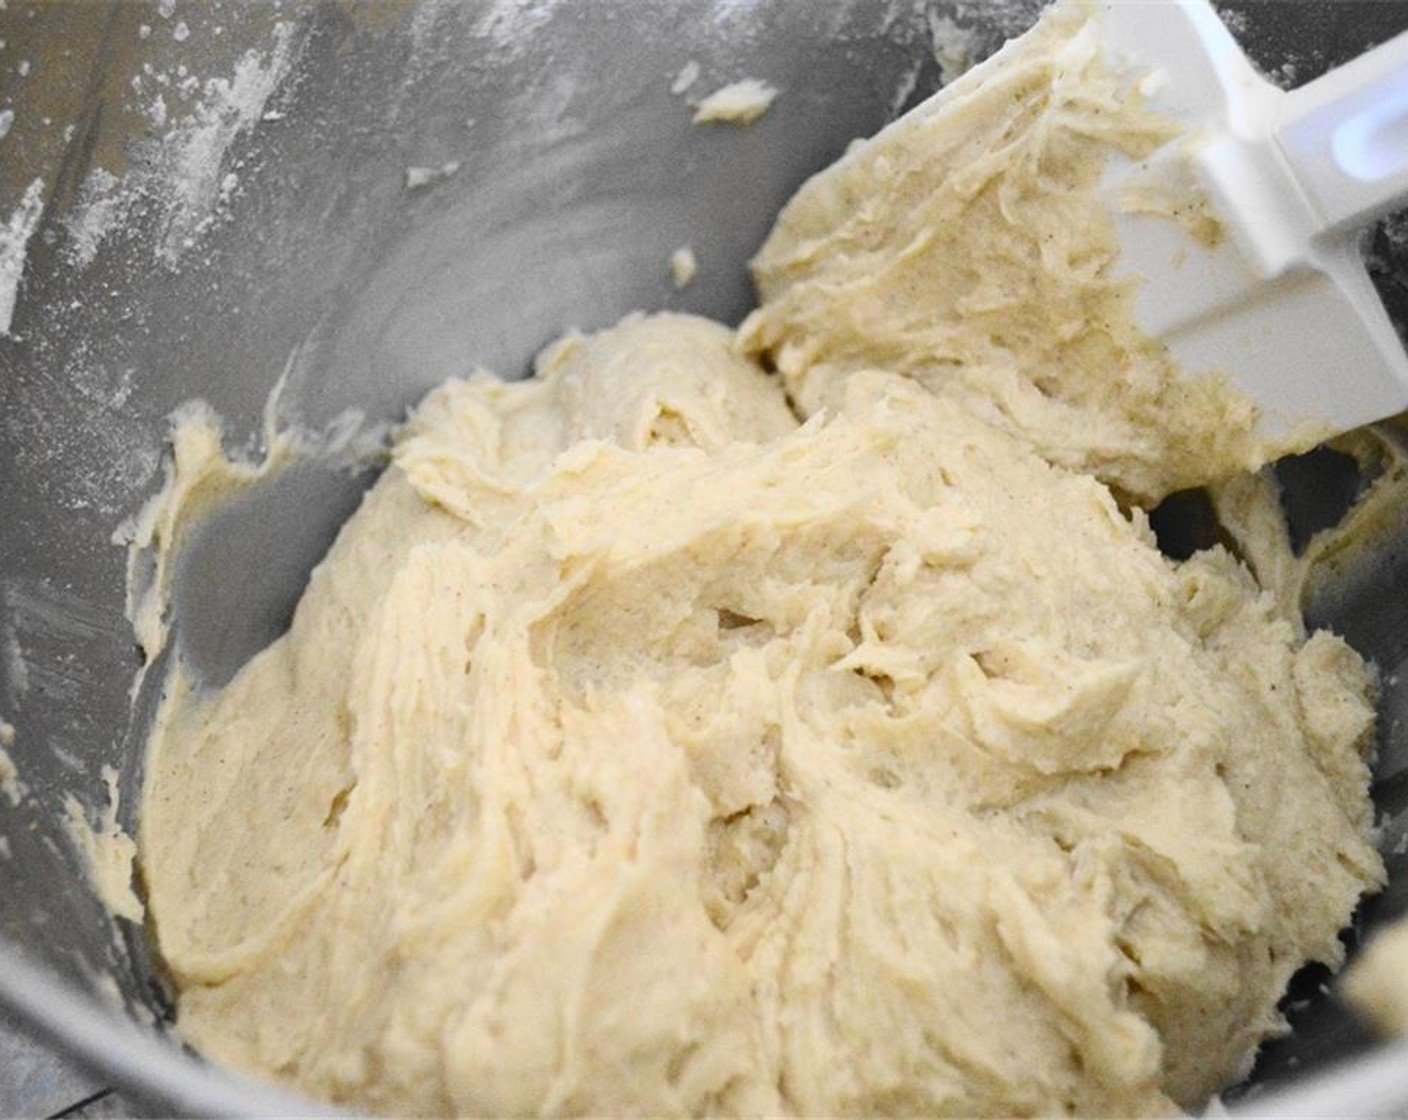 step 3 In the bowl of a stand mixer, combine the Mascarpone Cheese (2 cups), Butter (1 cup), and Granulated Sugar (2 cups). Beat them together well until creamy and fluffy.